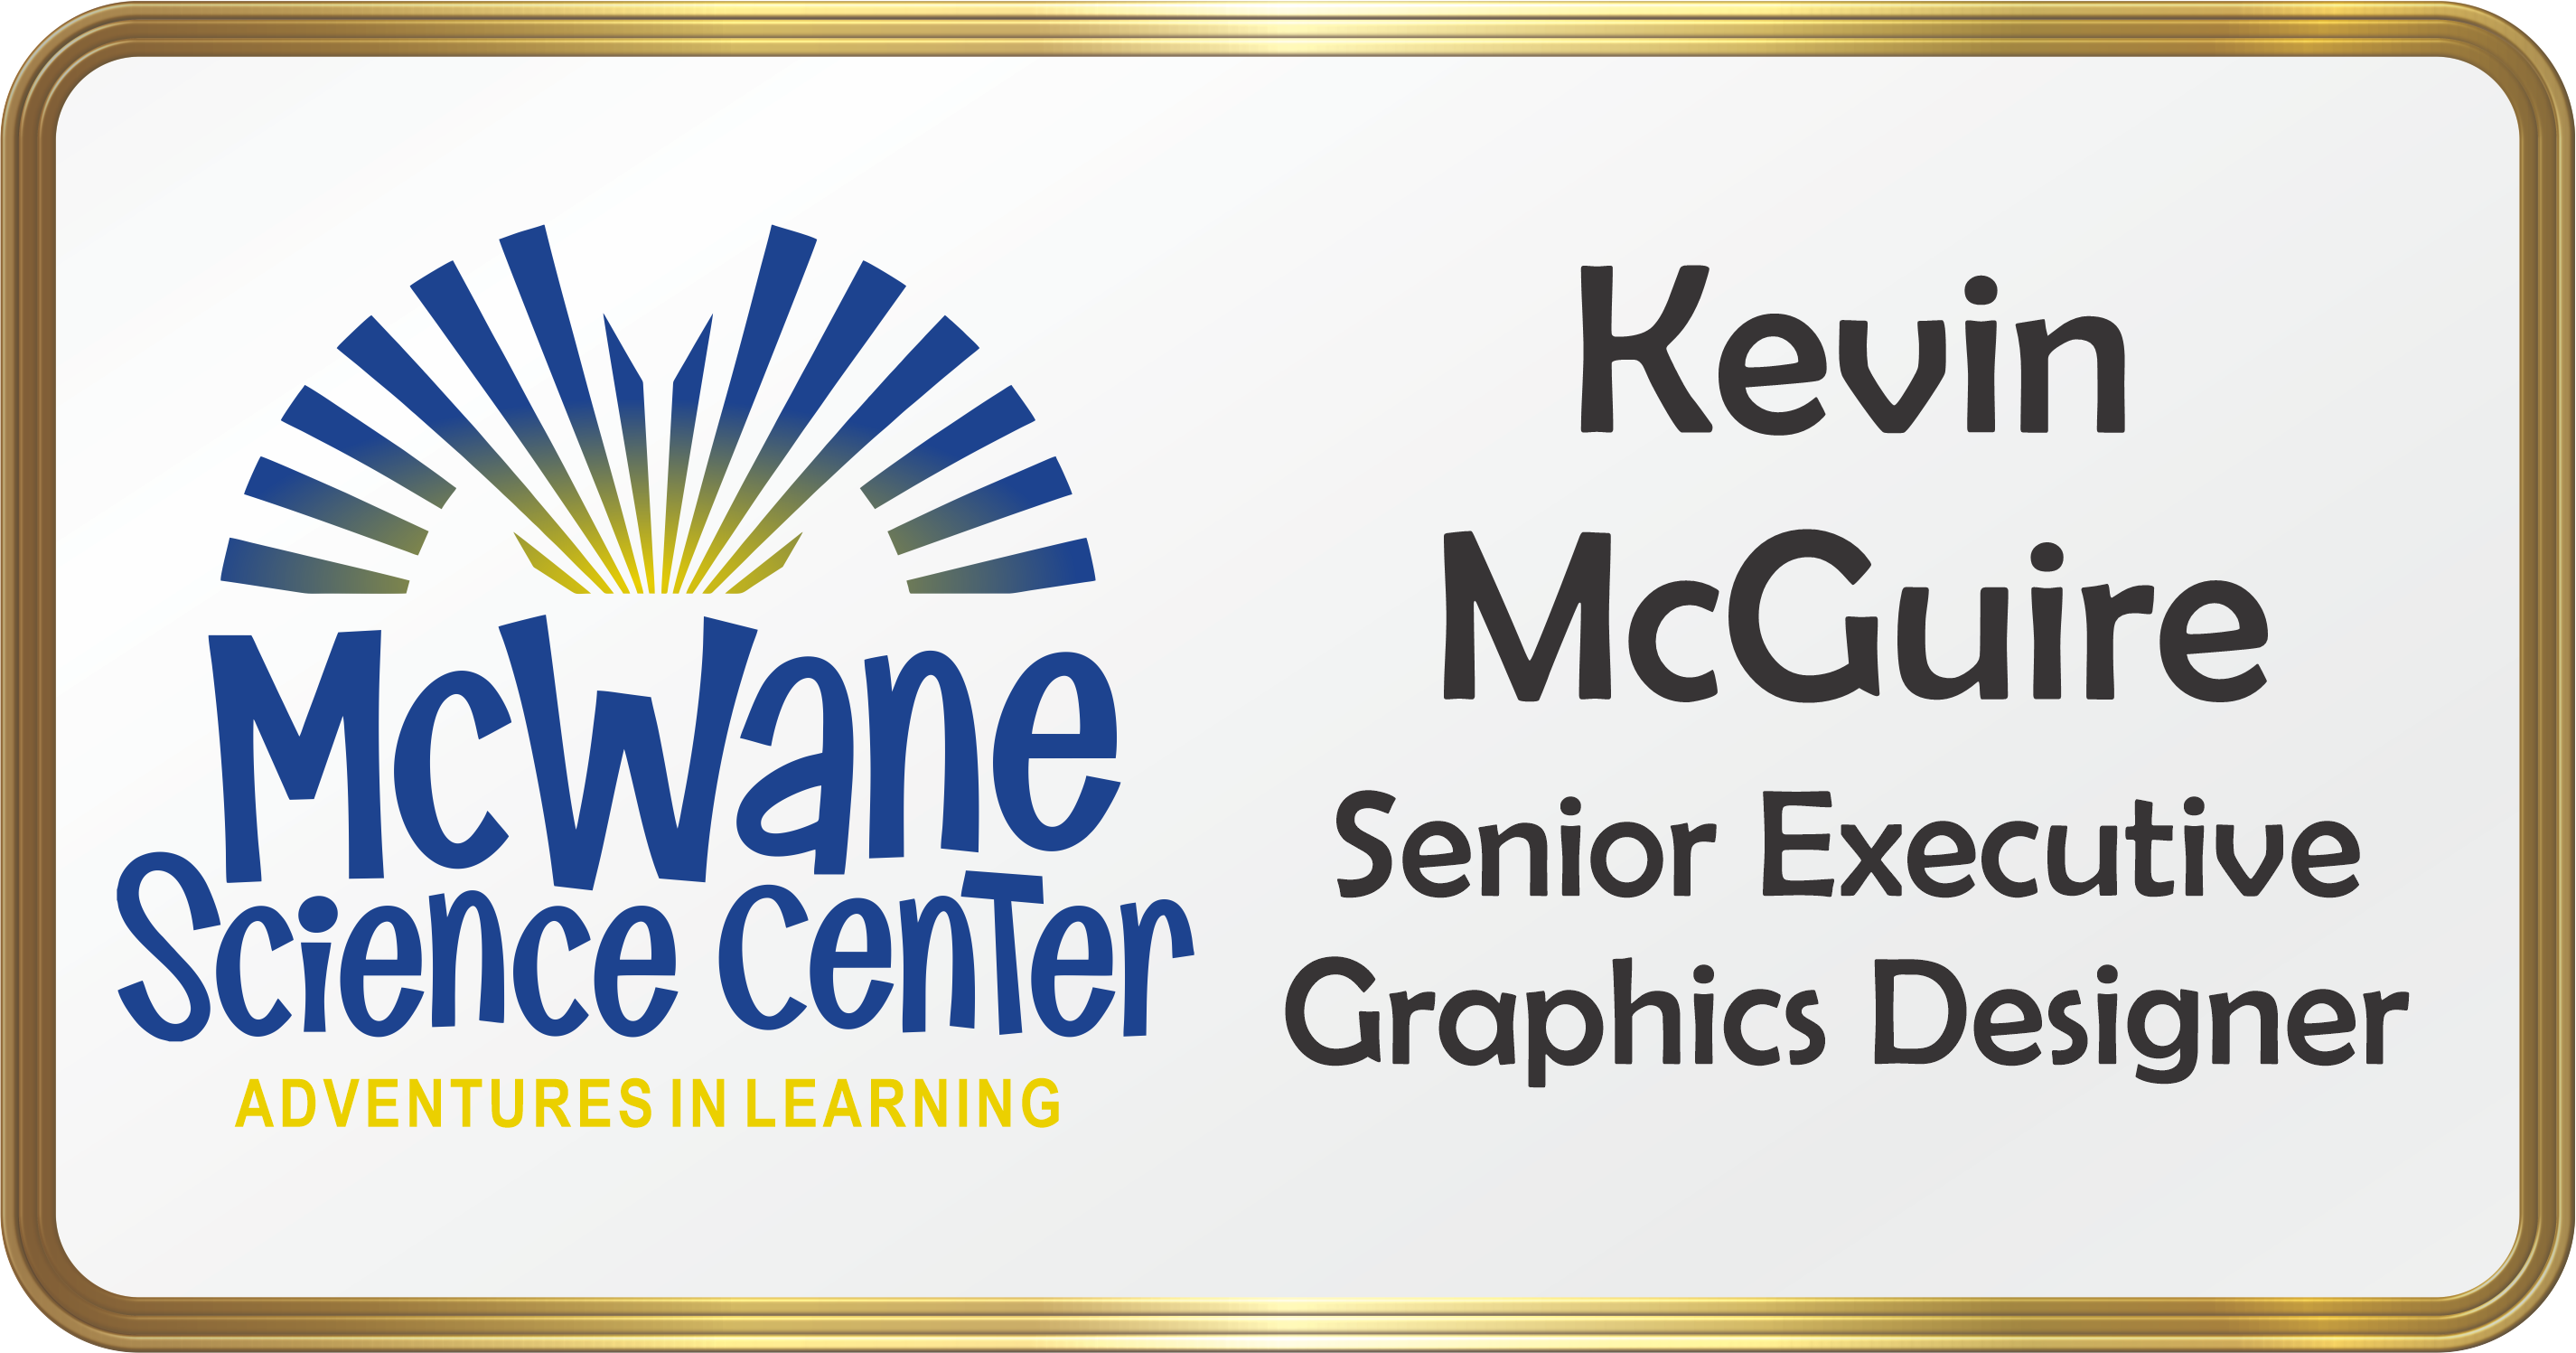 Name tag featuring the logo for McWane Science Center rendered in Blue and Yellow